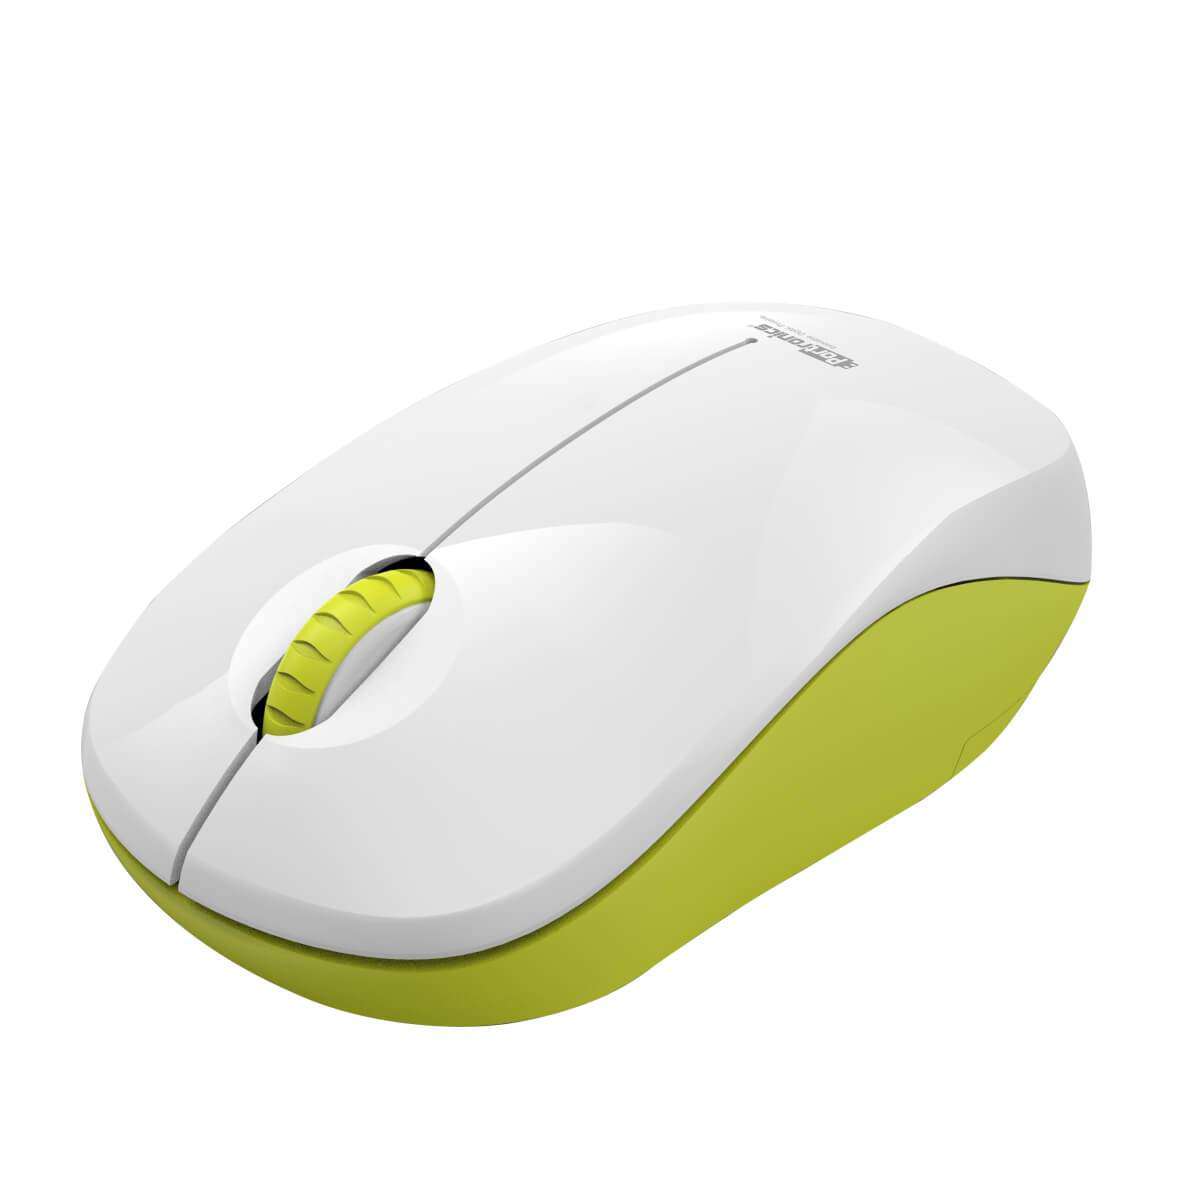 PORTRONICS-Toad 12 Wireless Optical Mouse